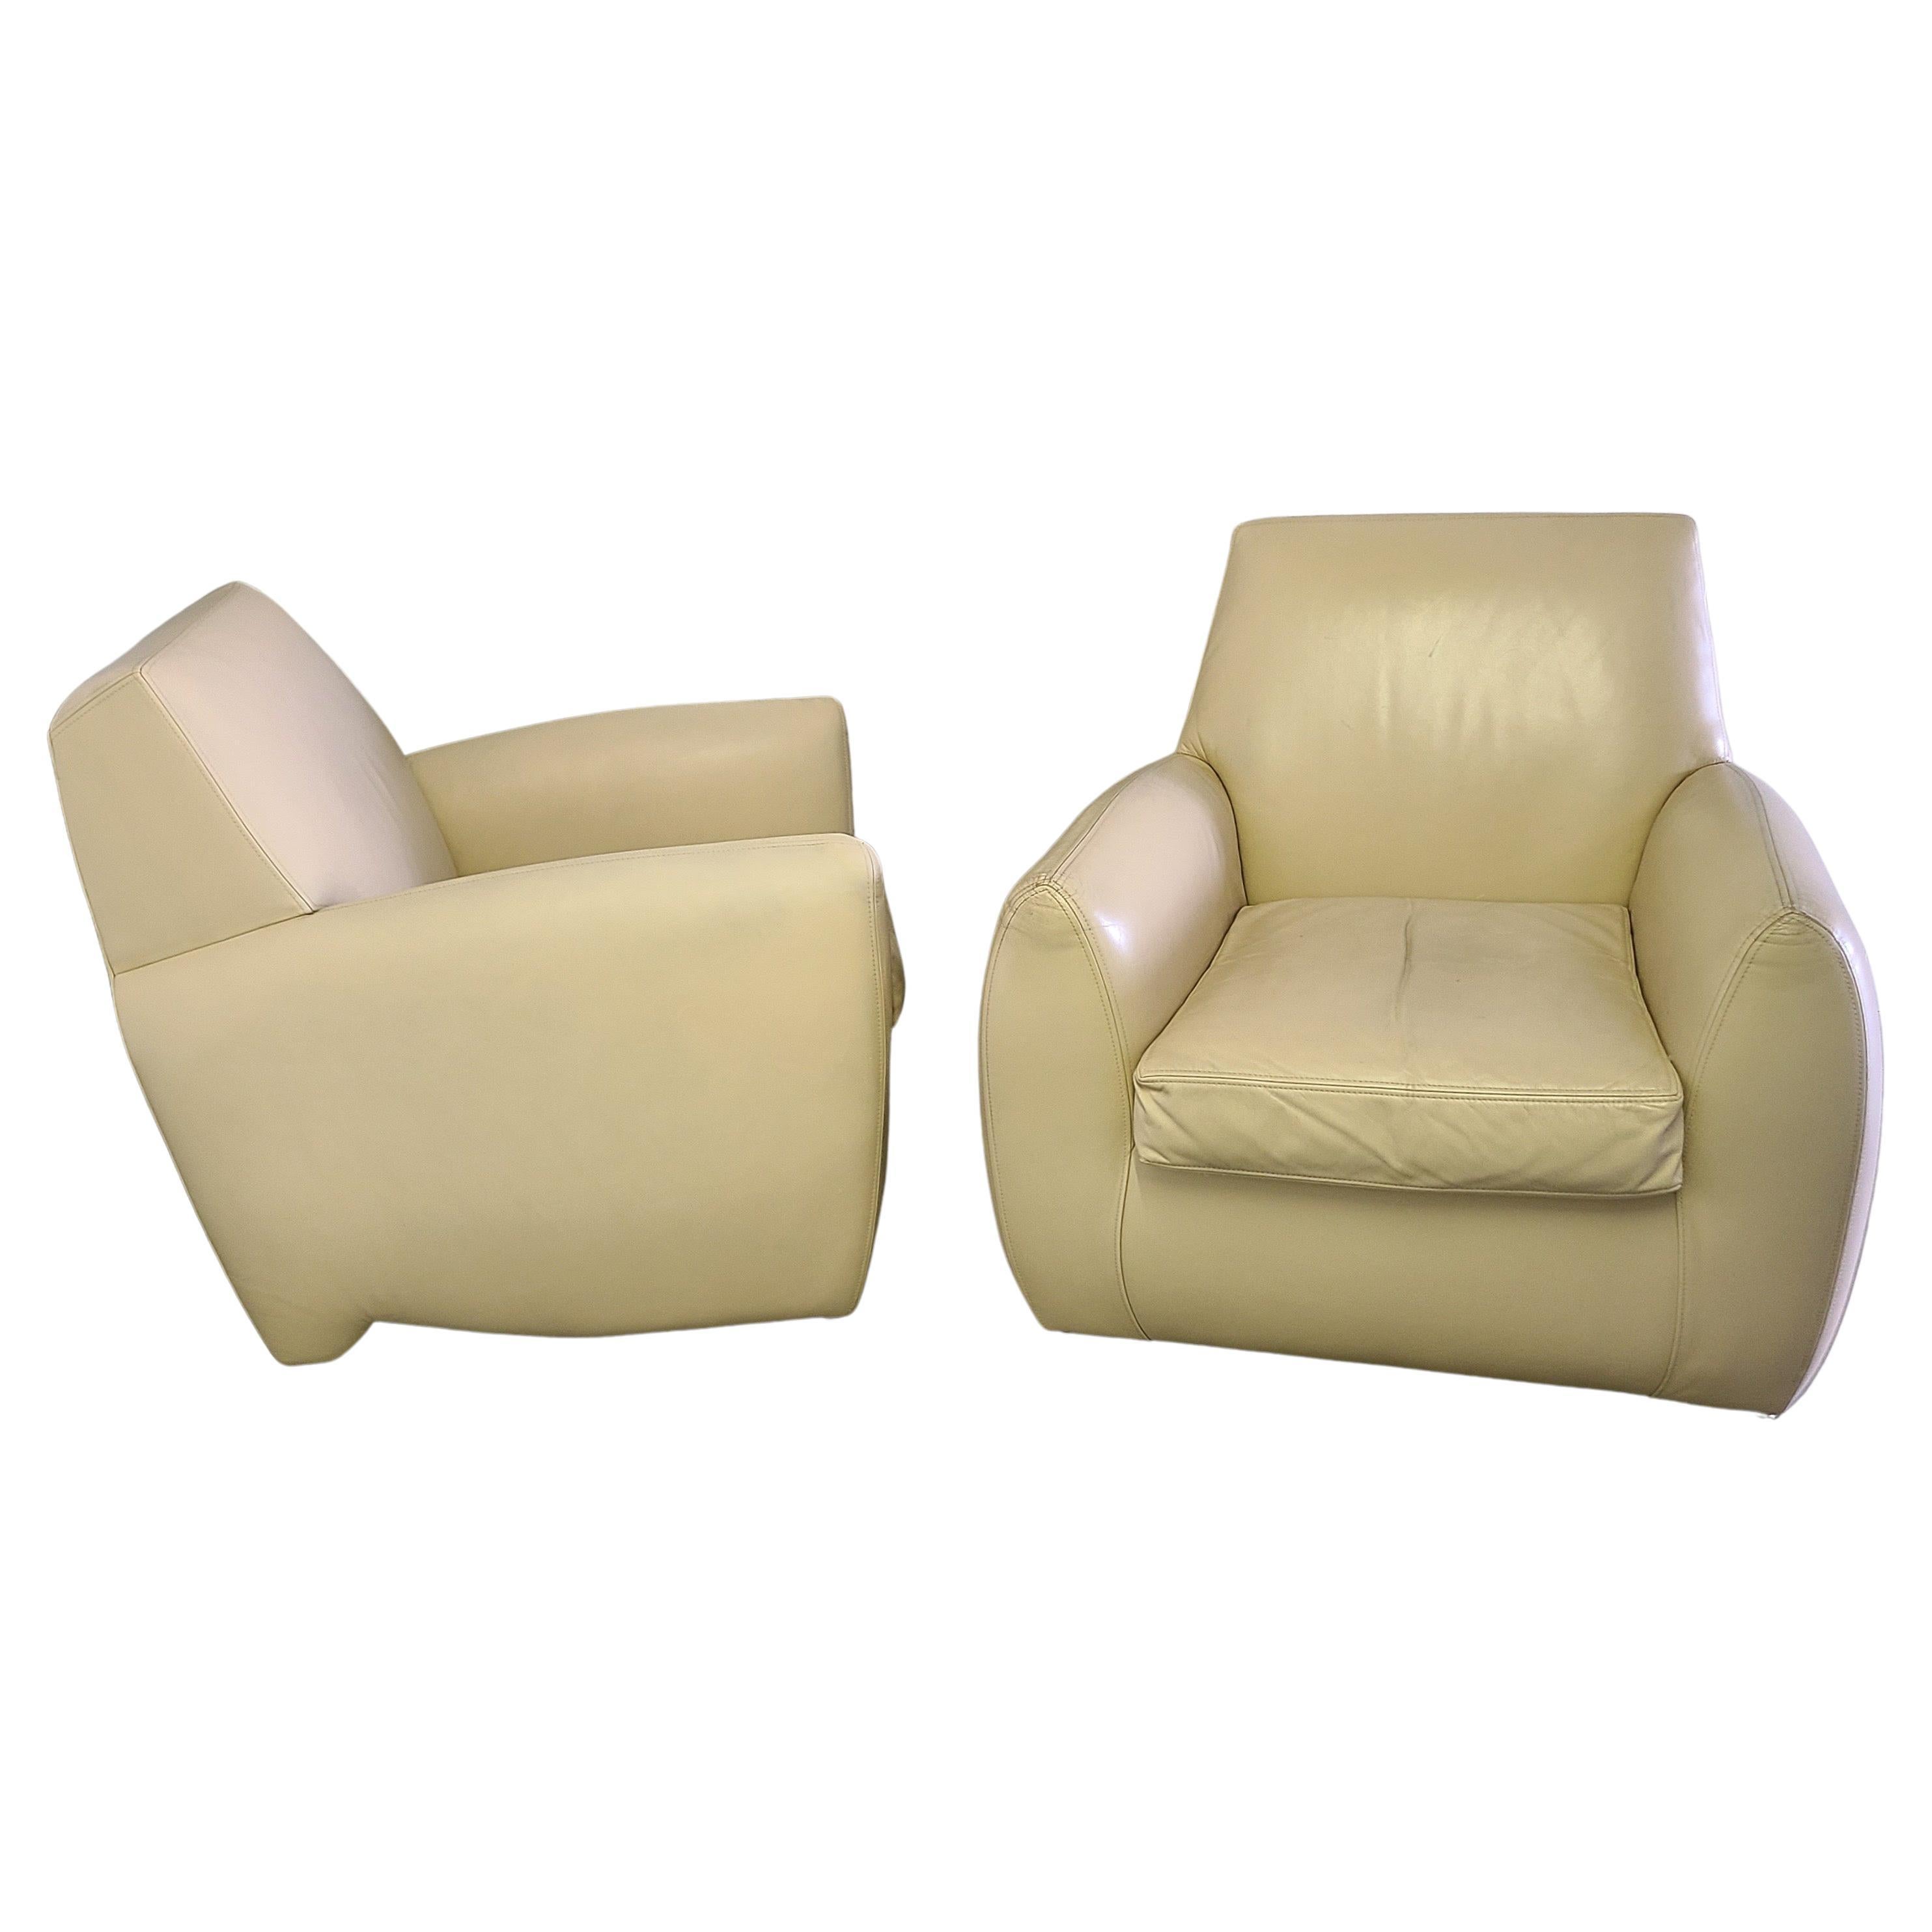 Please message us for a cost effective shipping quote to your location.

Pair leather lounge chairs by Dakota Jackson.